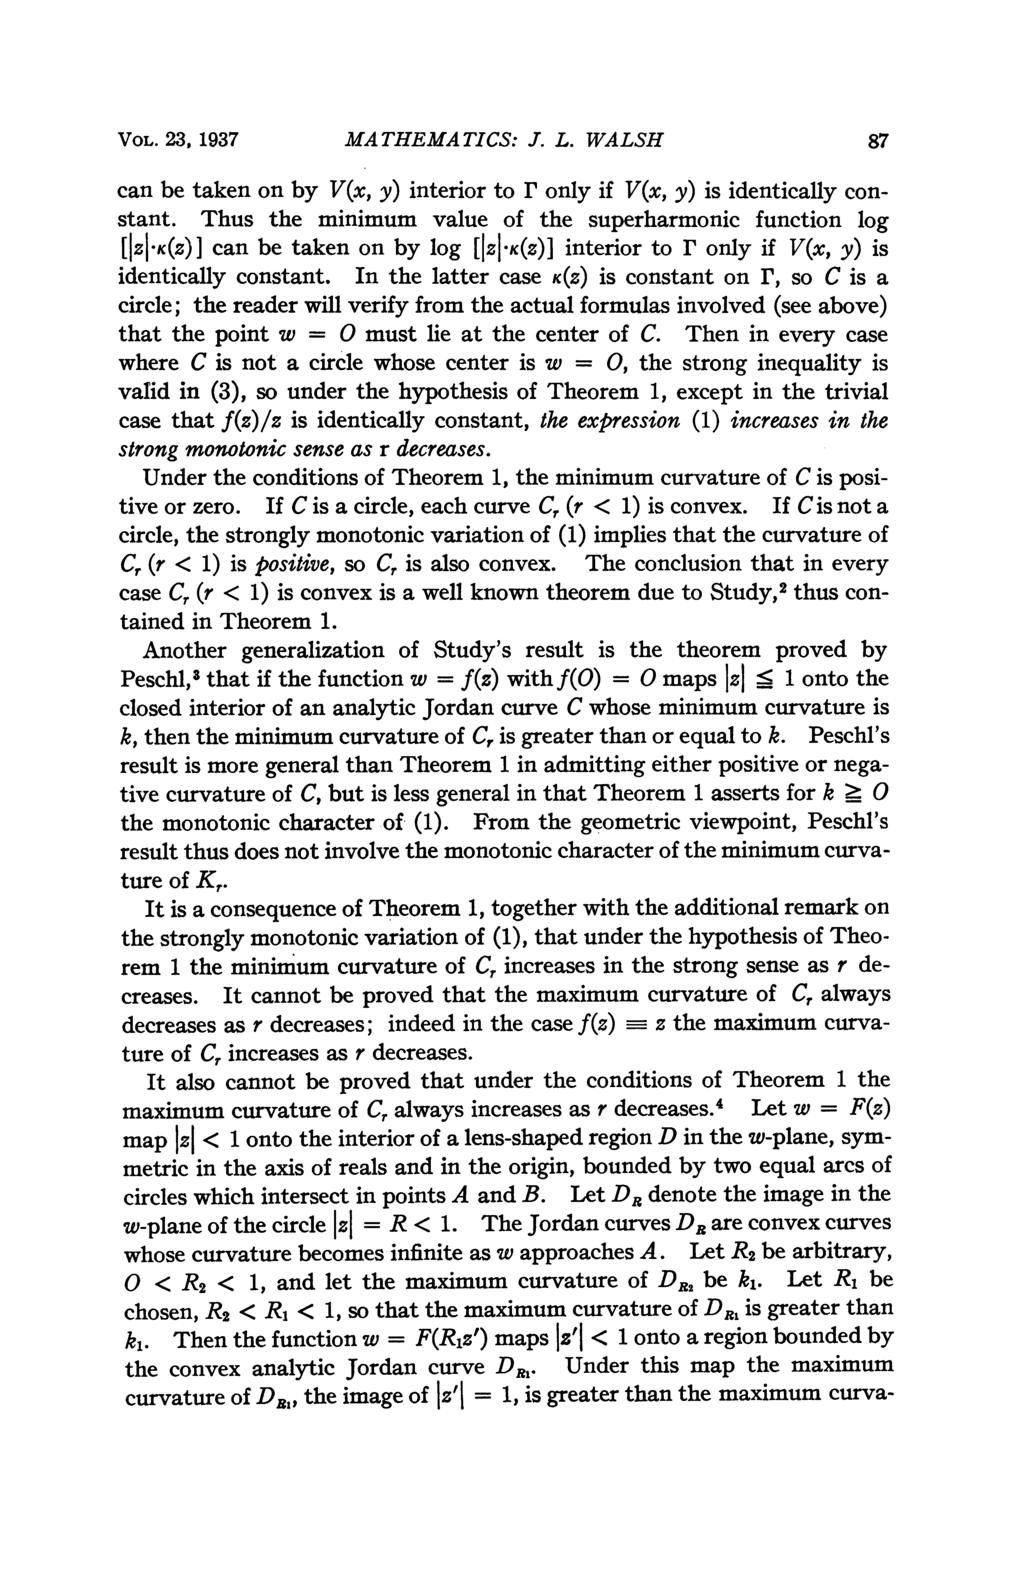 VOL. 23, 1937 MATHEMATICS: J. L. WALSH 87 can be taken on by V(x, y) interior to r only if V(x, y) is identically constant.